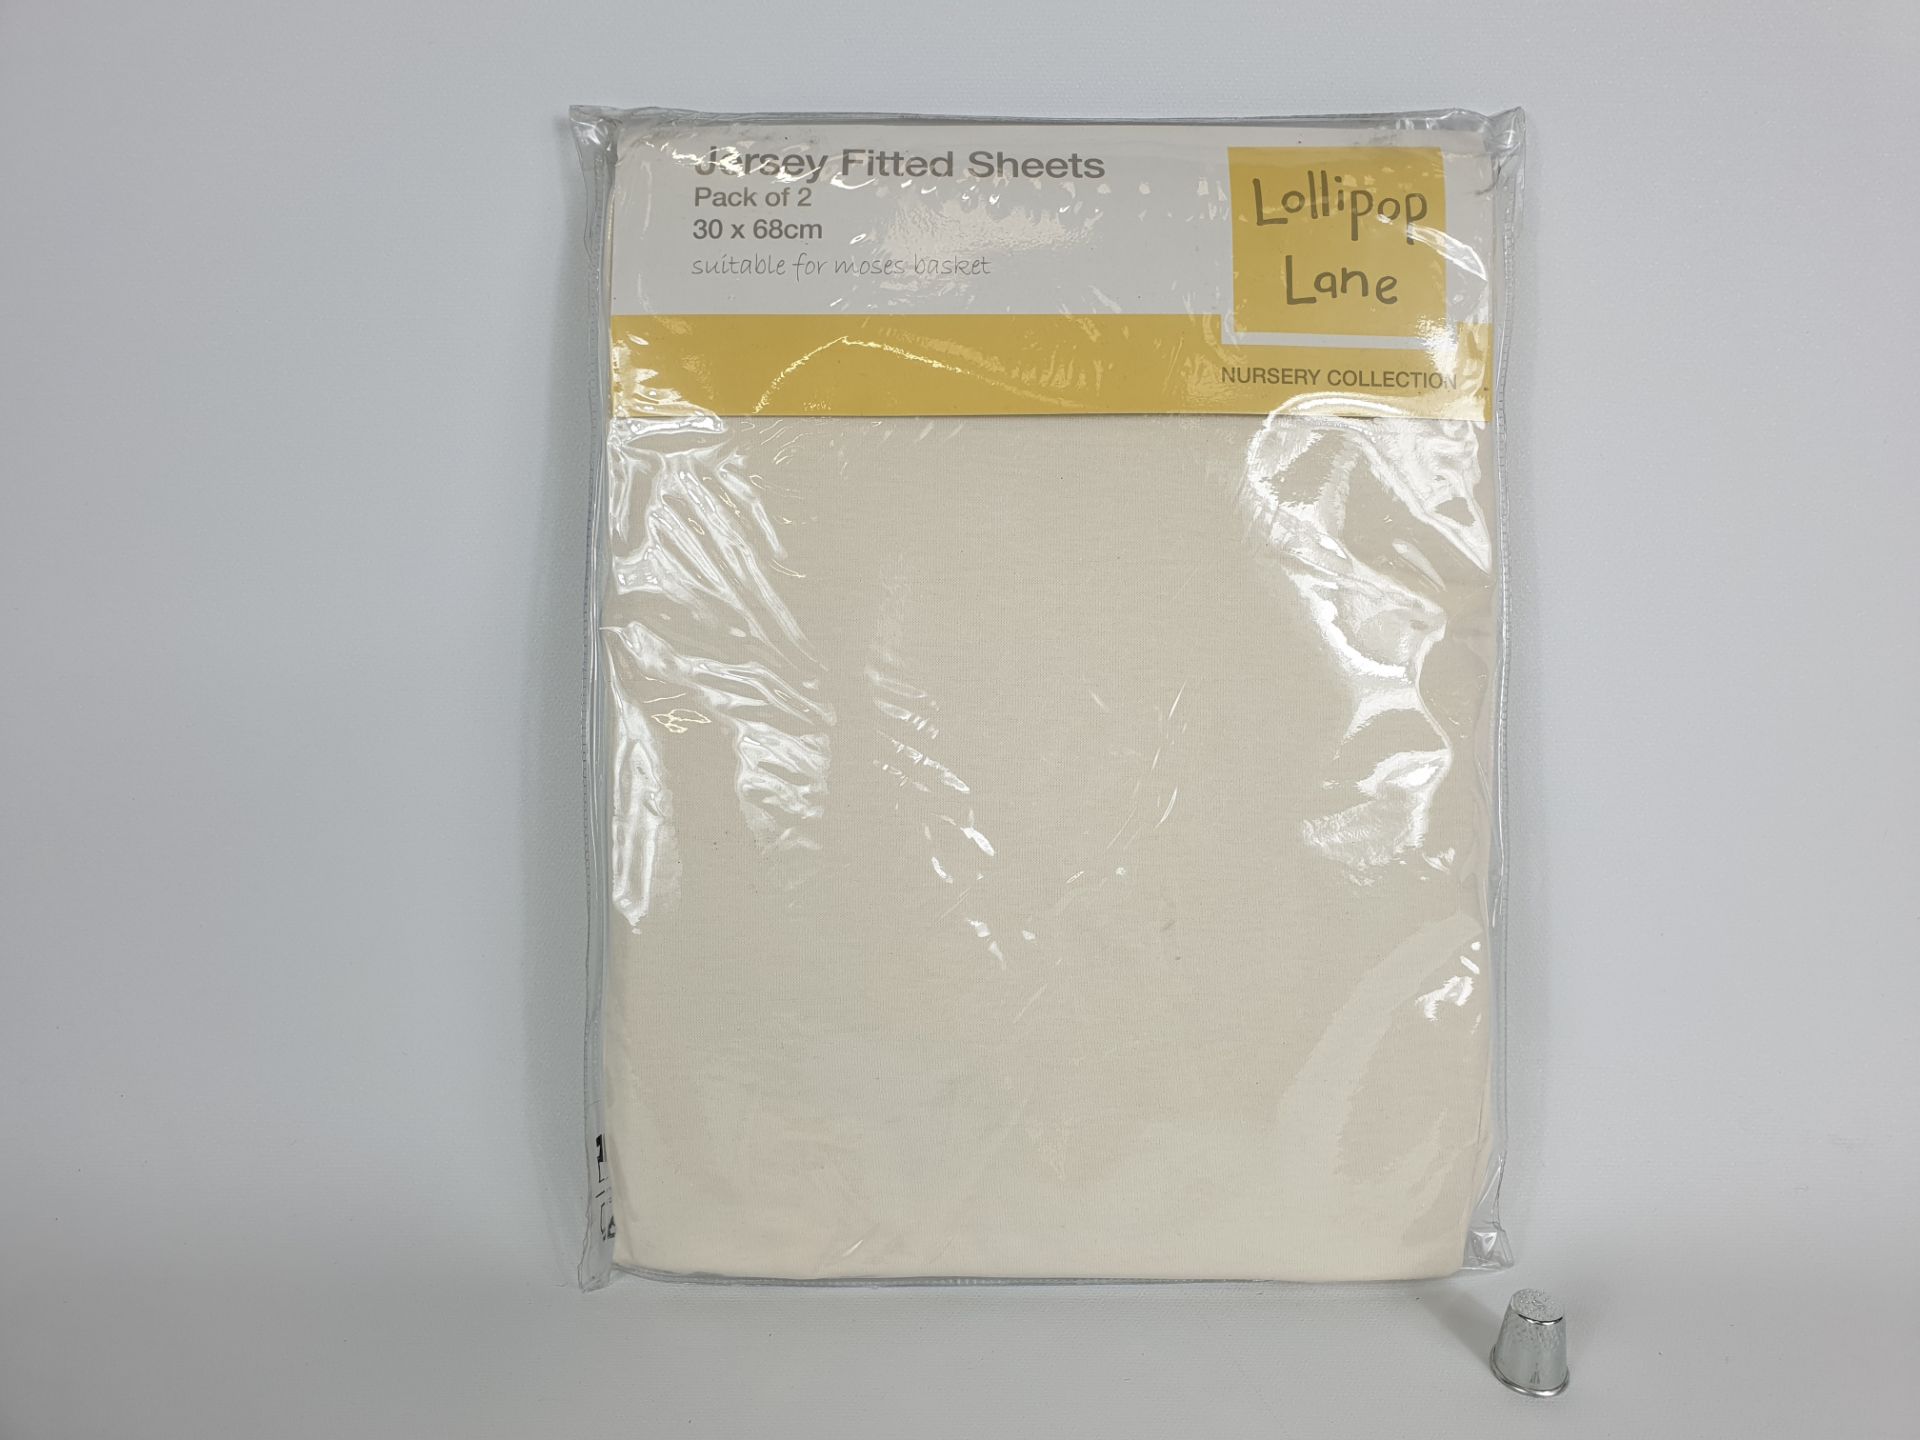 23 X PACKS OF 2 LOLLIPOP LANE JERSEY FITTED SHEETS SIZE 30 X 68 CM